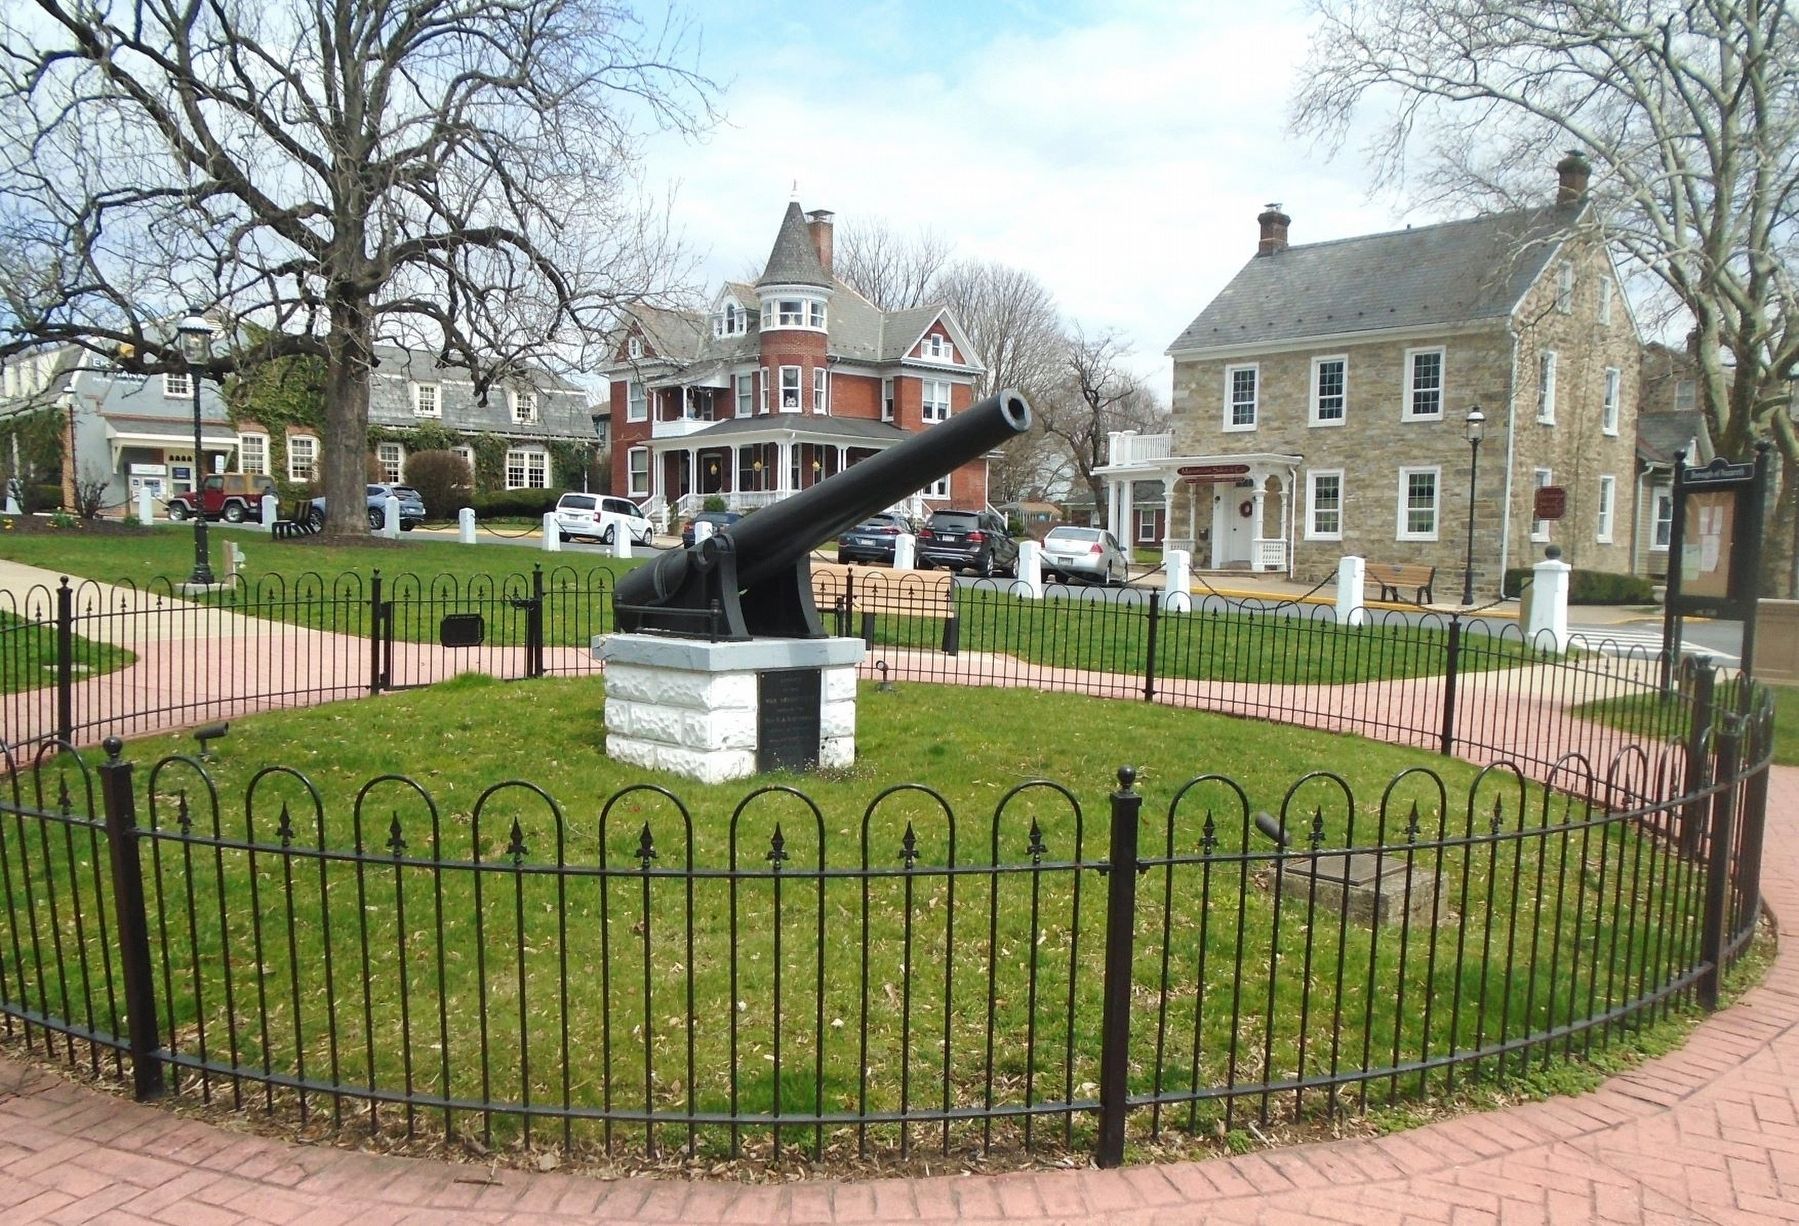 153rd Pennsylvania Volunteer Infantry Regiment Memorial (Cannon and Markers) image. Click for full size.